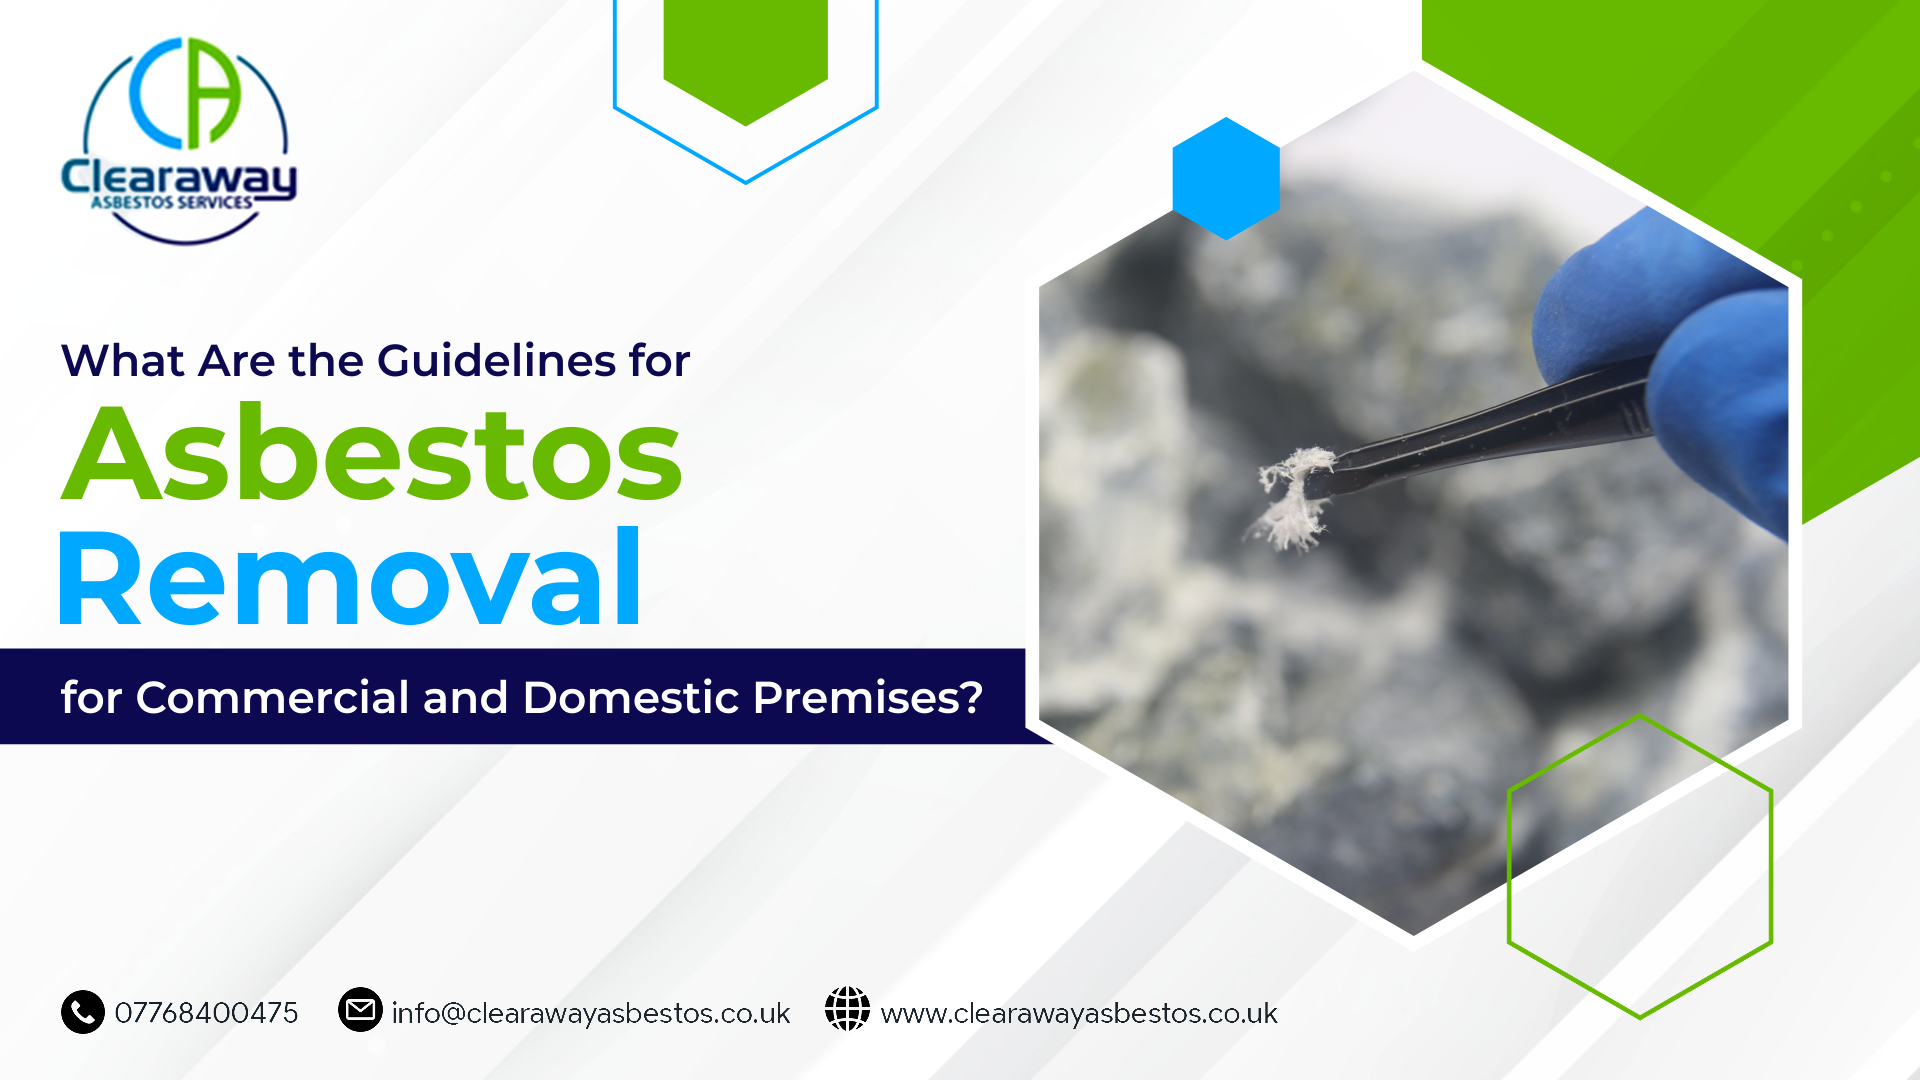 What Are the Guidelines for Asbestos Removal for Commercial and Domestic Premises